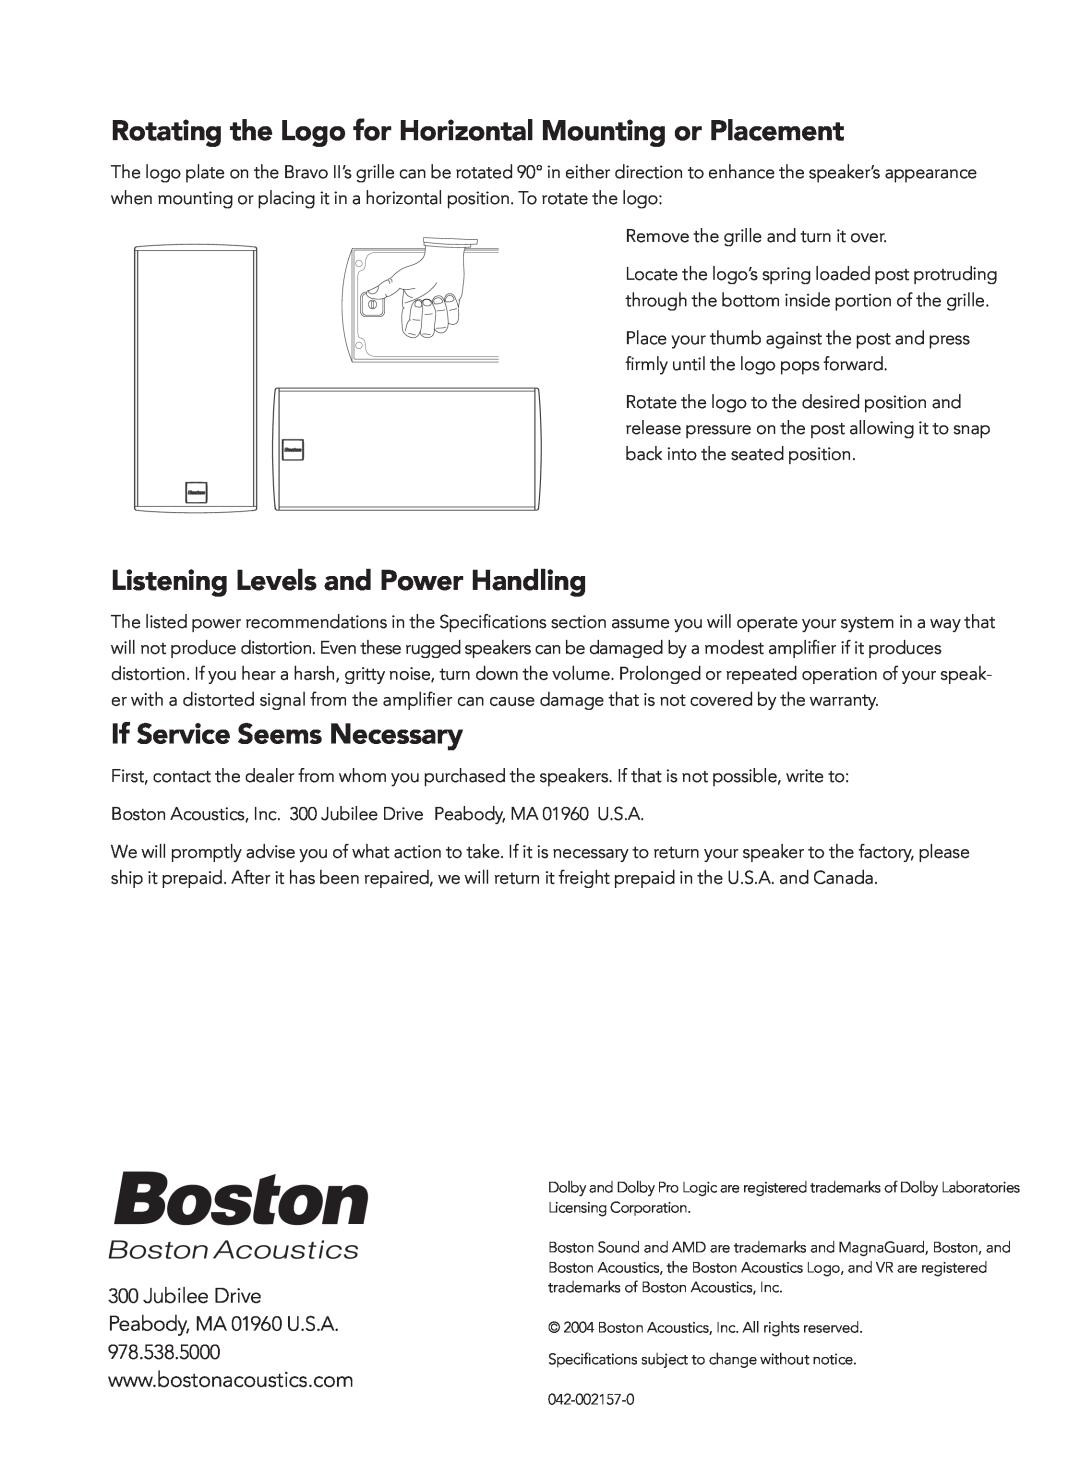 Boston Acoustics 2 Listening Levels and Power Handling, If Service Seems Necessary, Jubilee Drive, Peabody, MA 01960 U.S.A 